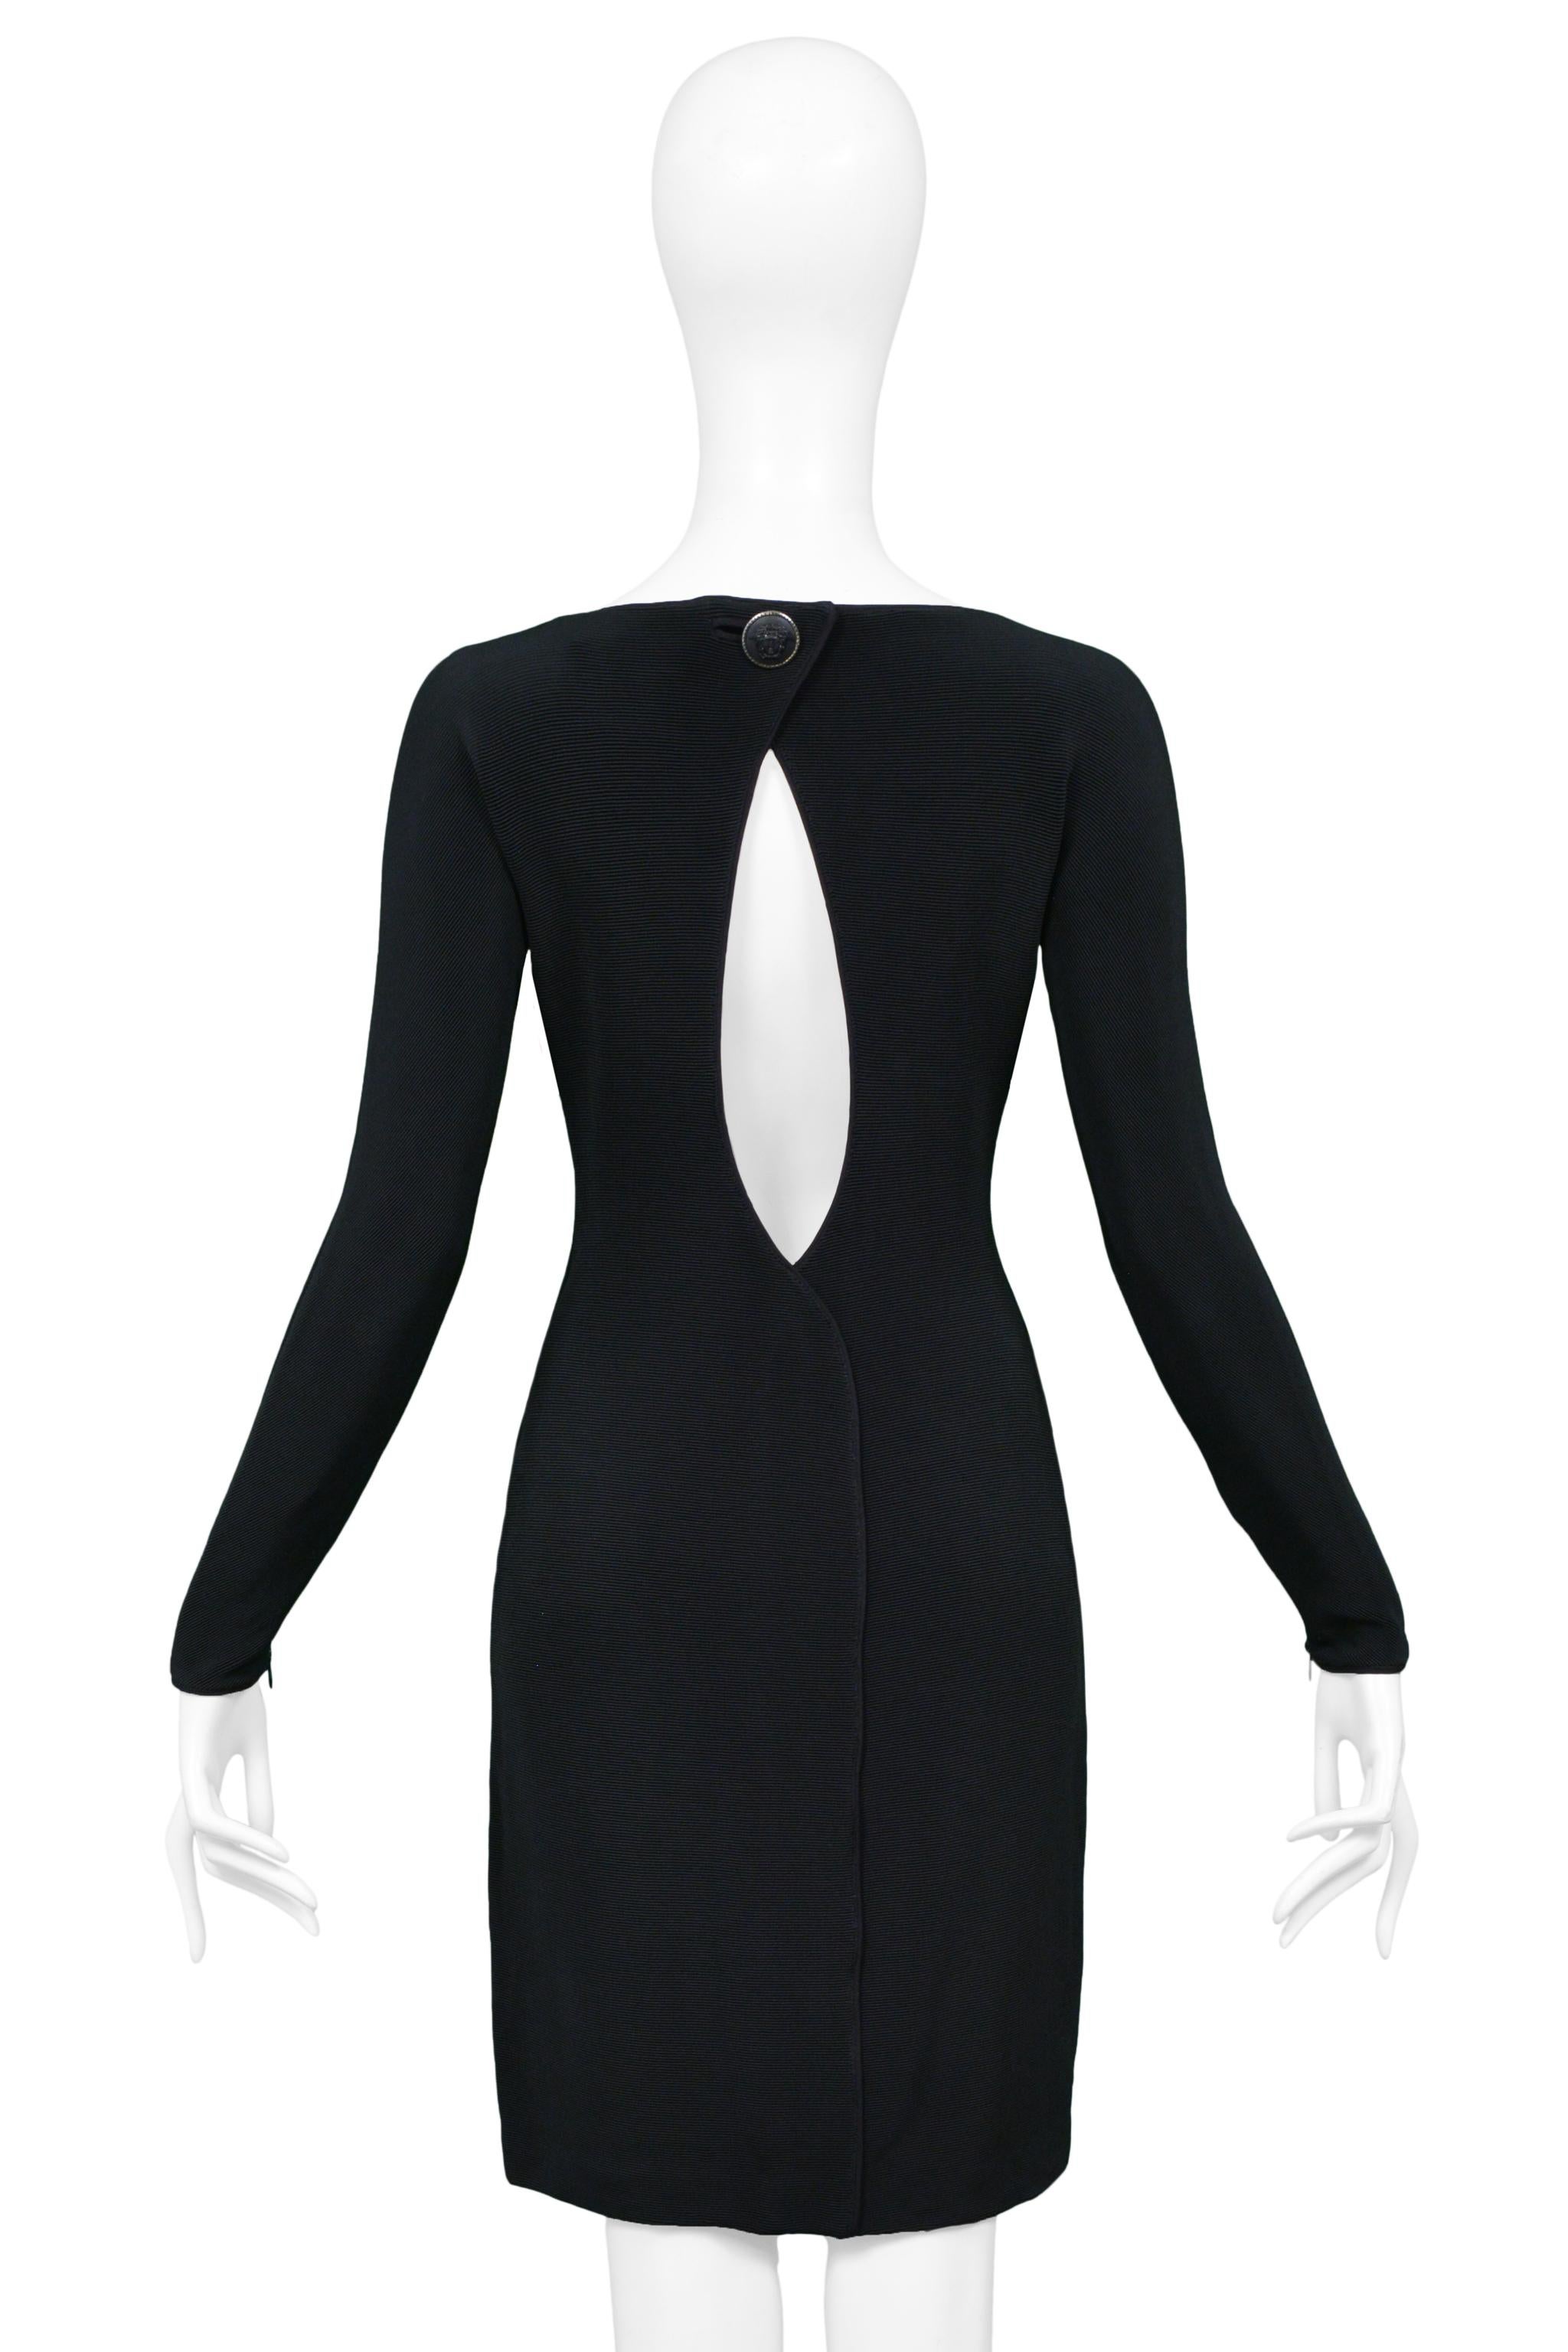 Versace Black Mini Cocktail Dress With Cutout Back For Sale 2